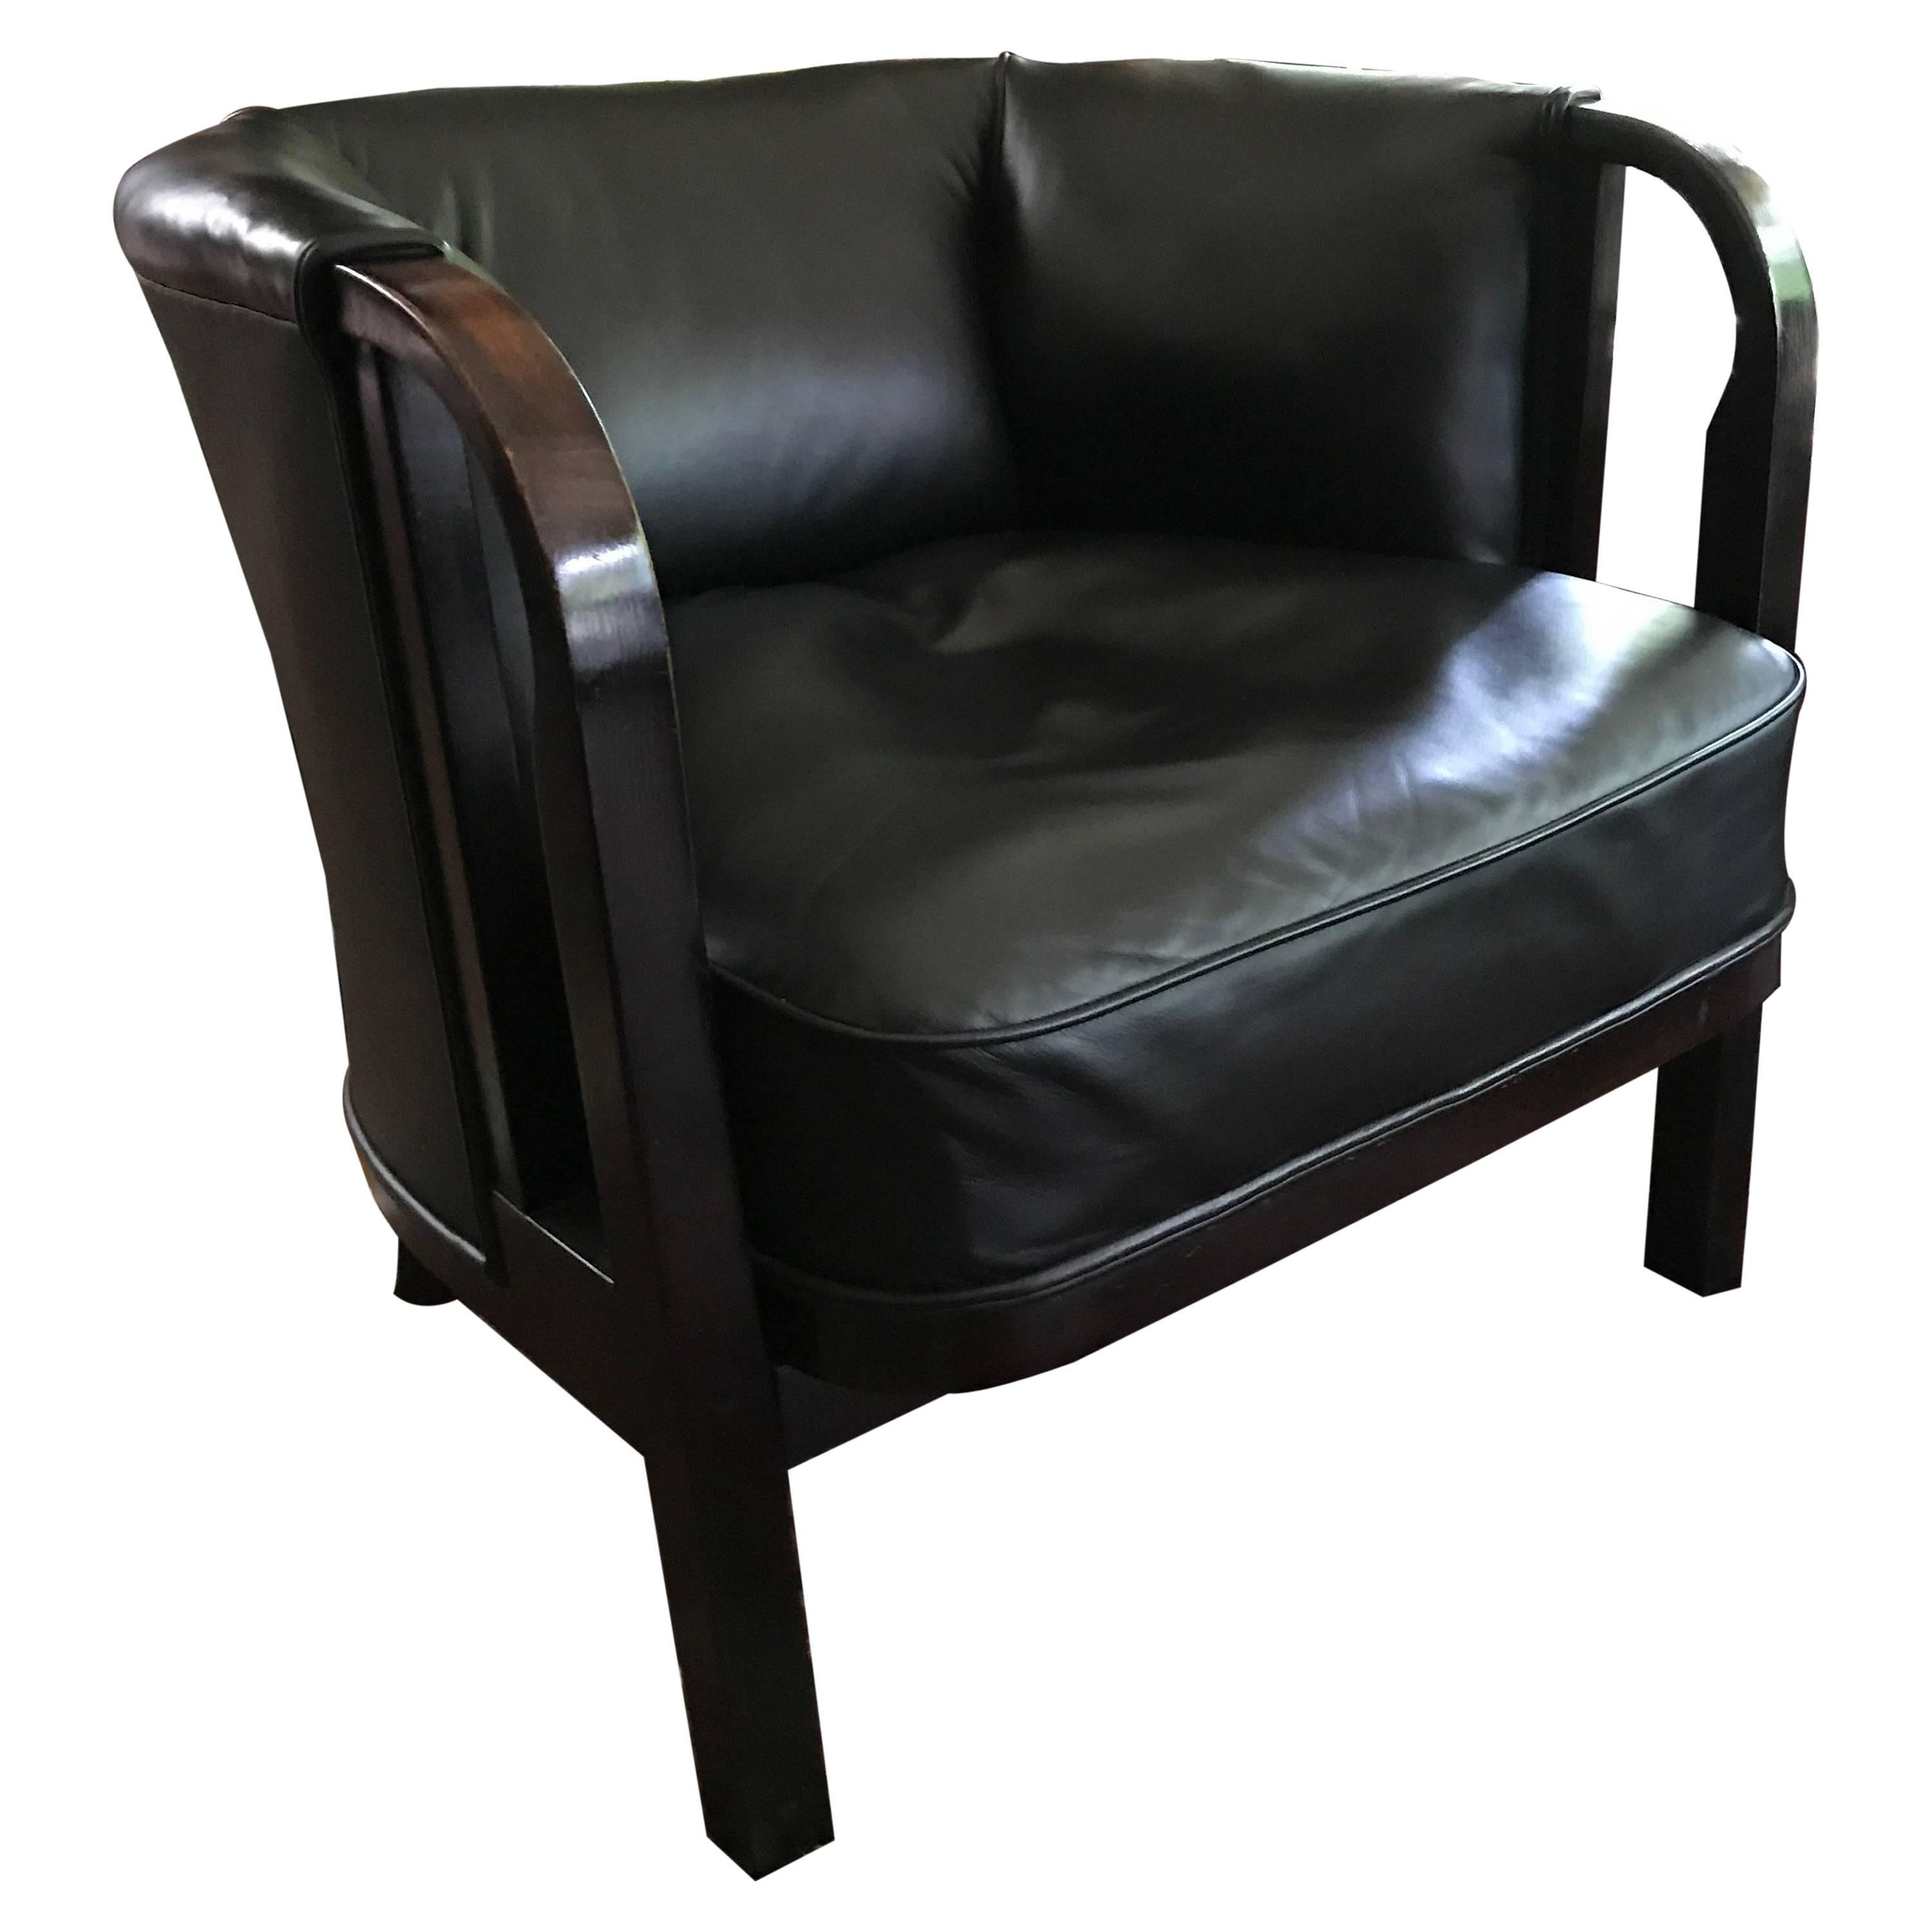 Club  bentwood Armchair Thonet, 1911-1915 Labeled Newly Upholstered in Leather!